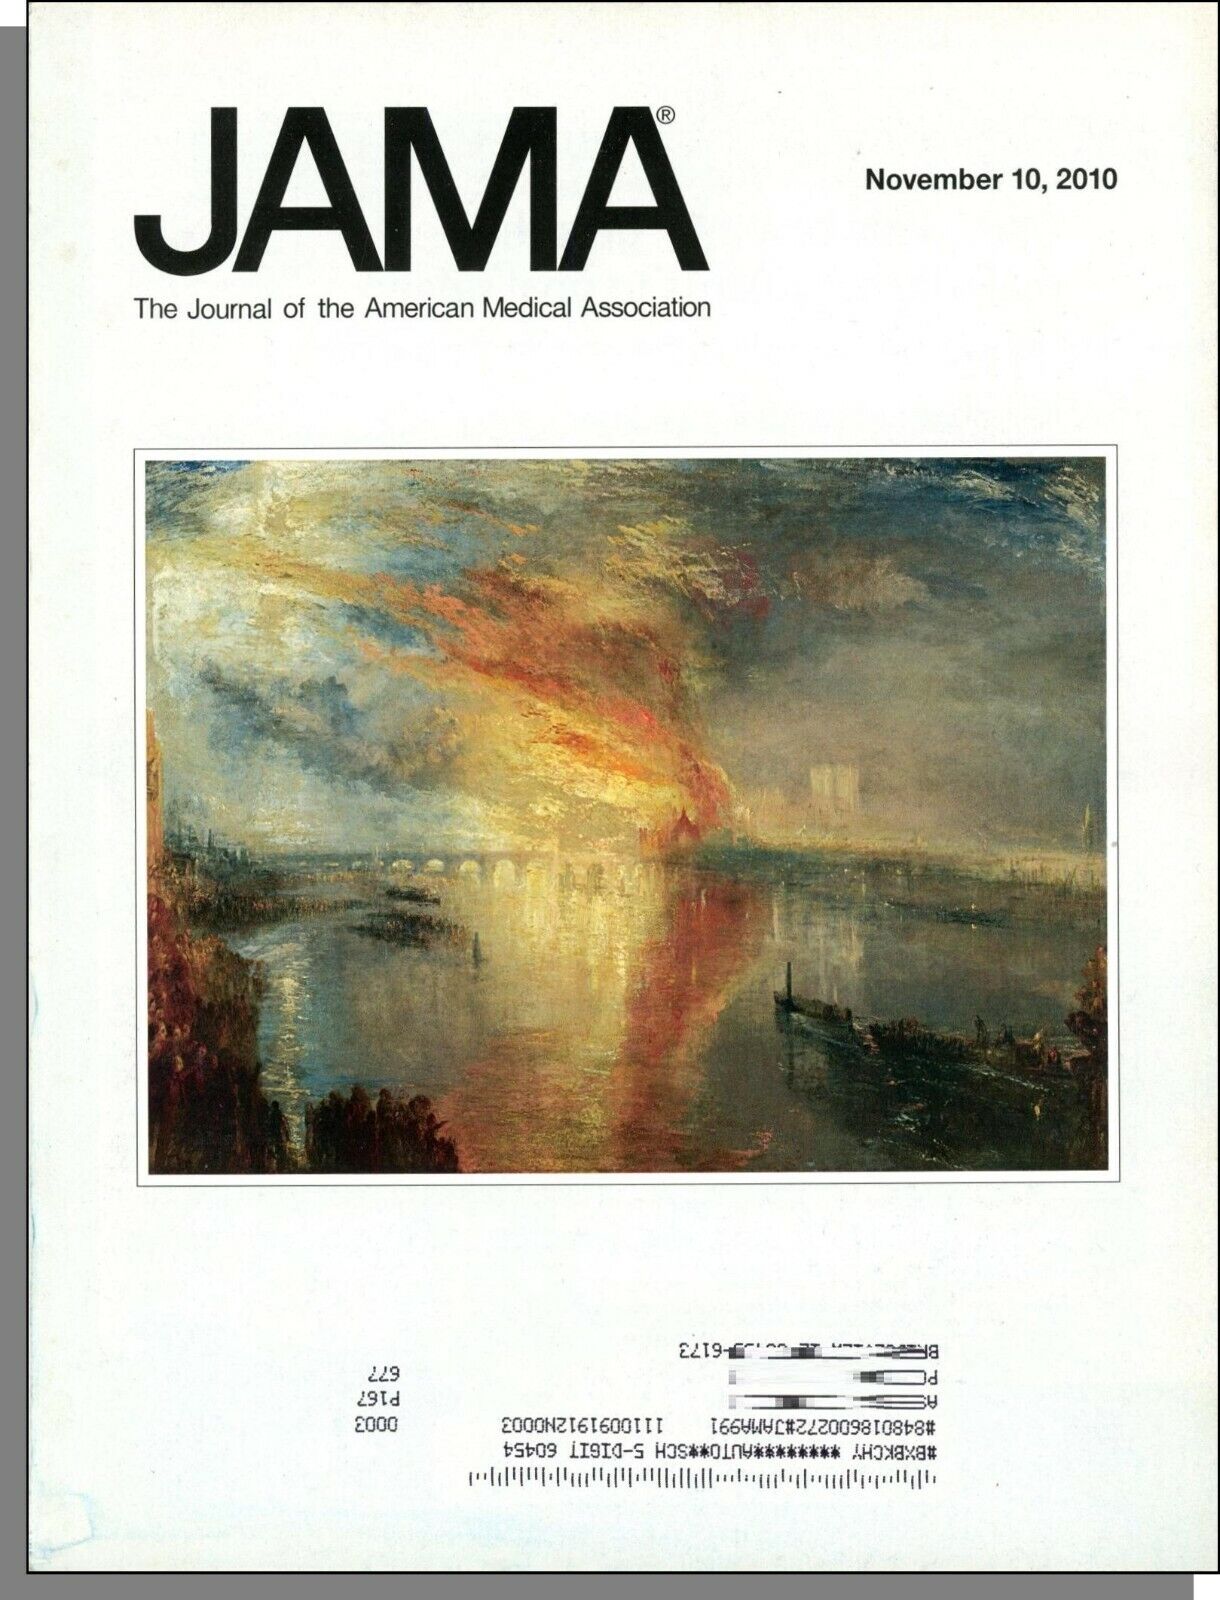 Jama-Journal of the American Medical Association